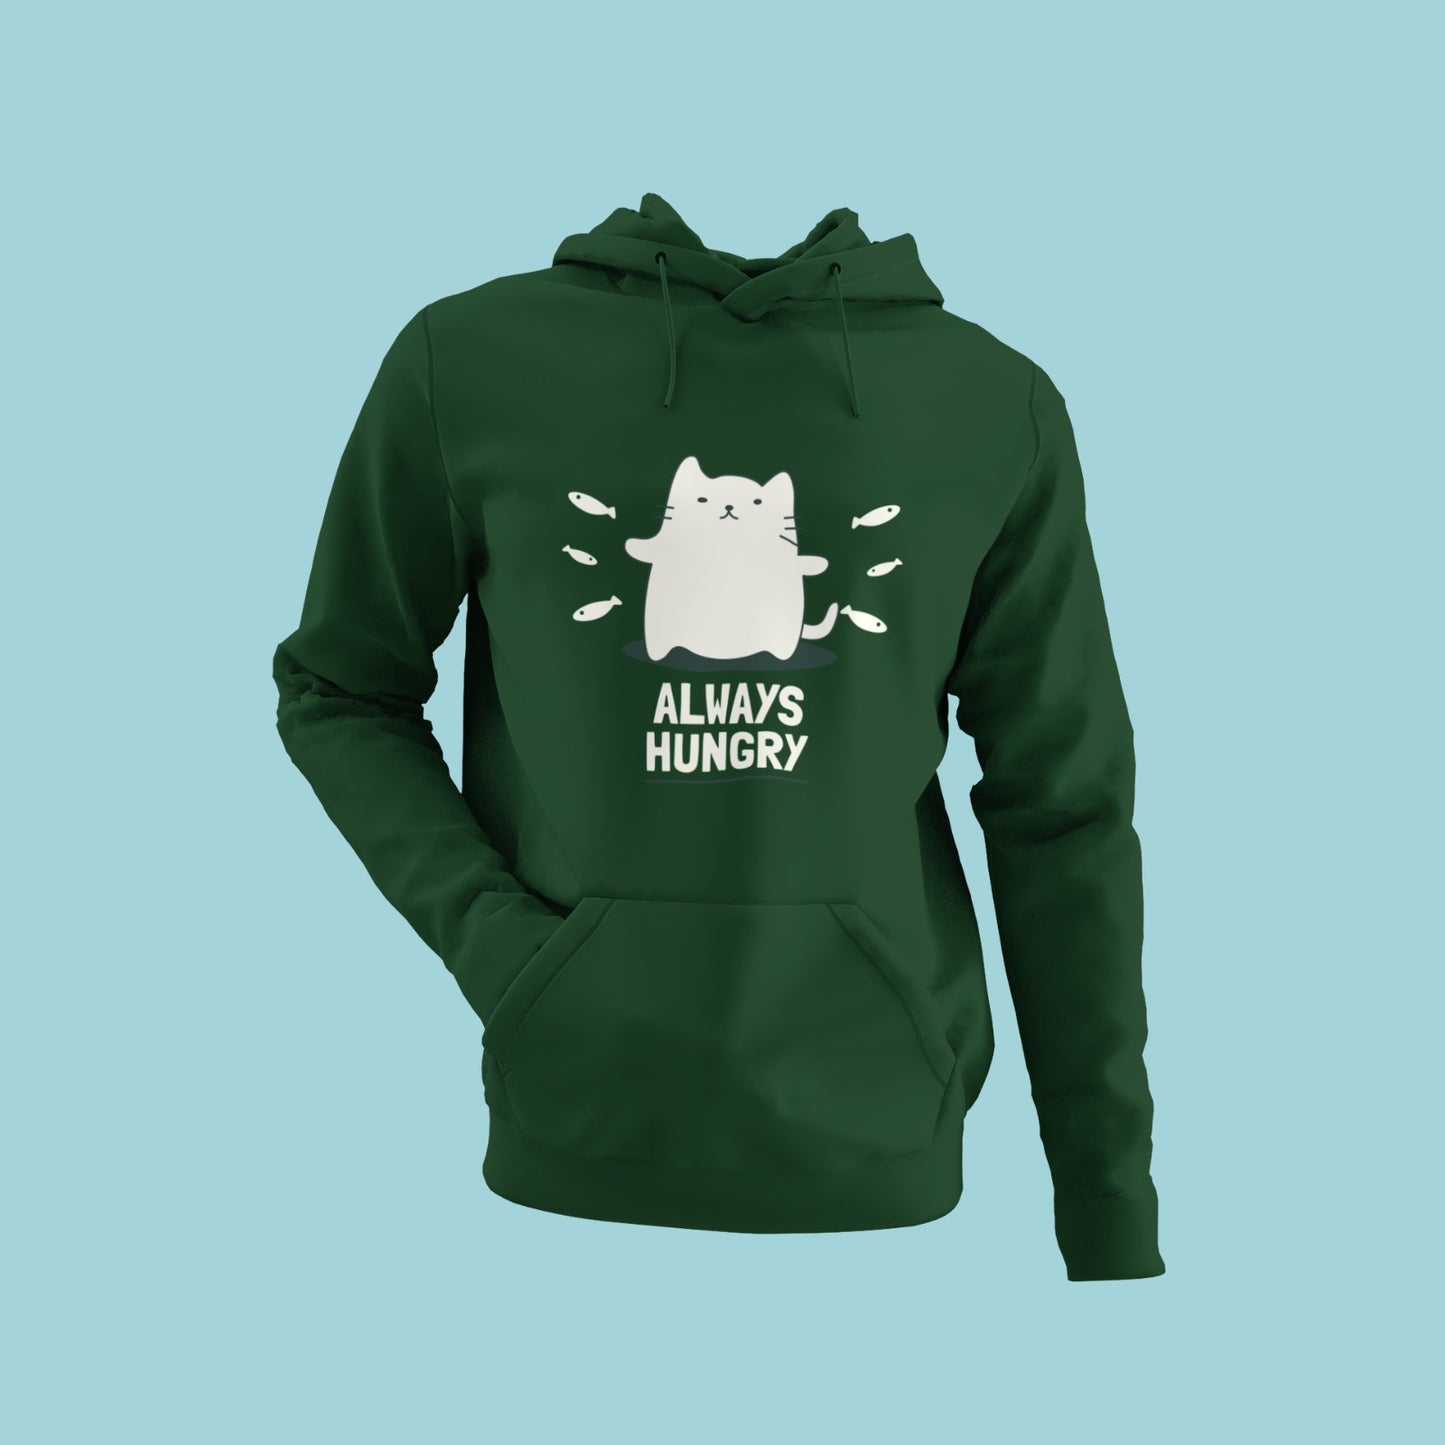  Satisfy your hunger for style with this olive green hoodie featuring a fat and chubby grey cat surrounded by small fish and the slogan "always hungry." Perfect for cat lovers and foodies alike, this comfortable and eye-catching hoodie is a must-have. Order now to show off your love for felines and good food!